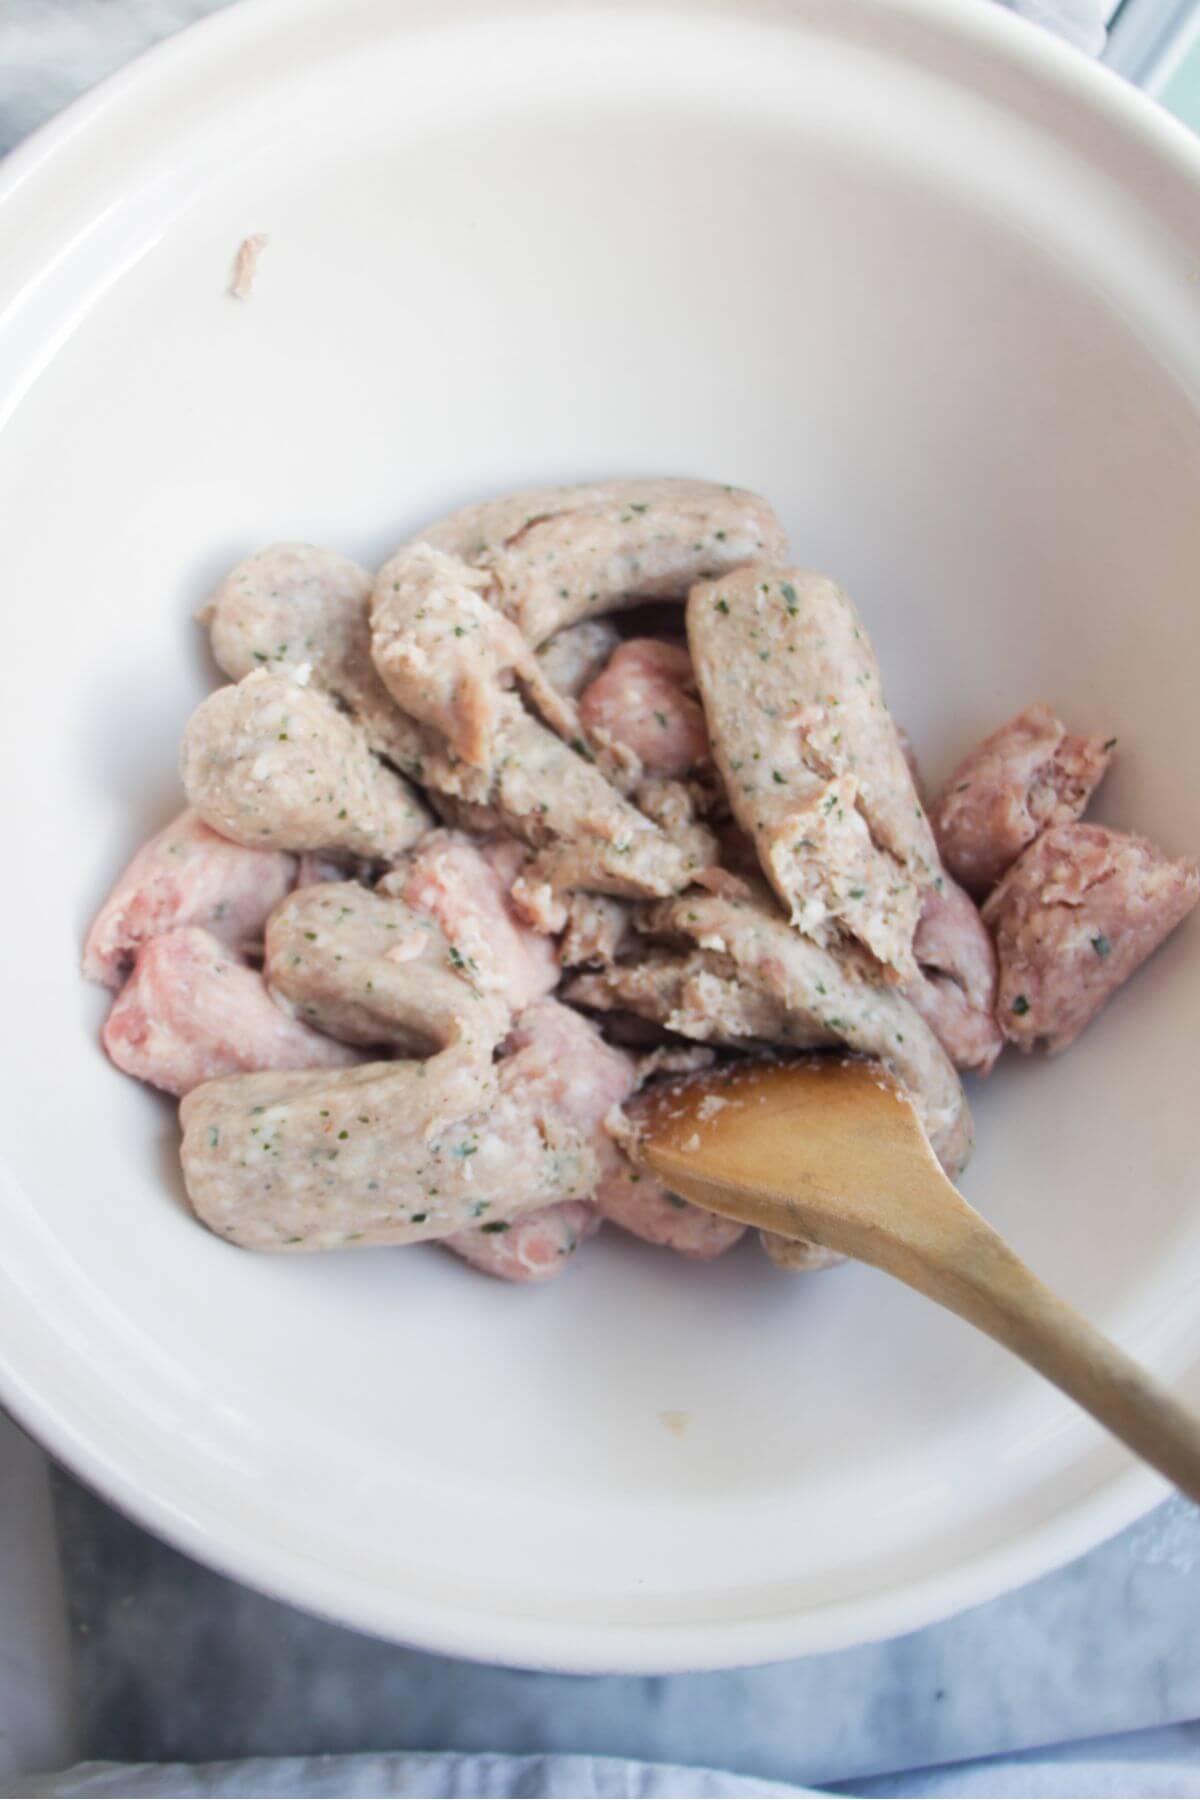 Sausage meat in a large white mixing bowl with a large wooden spoon.